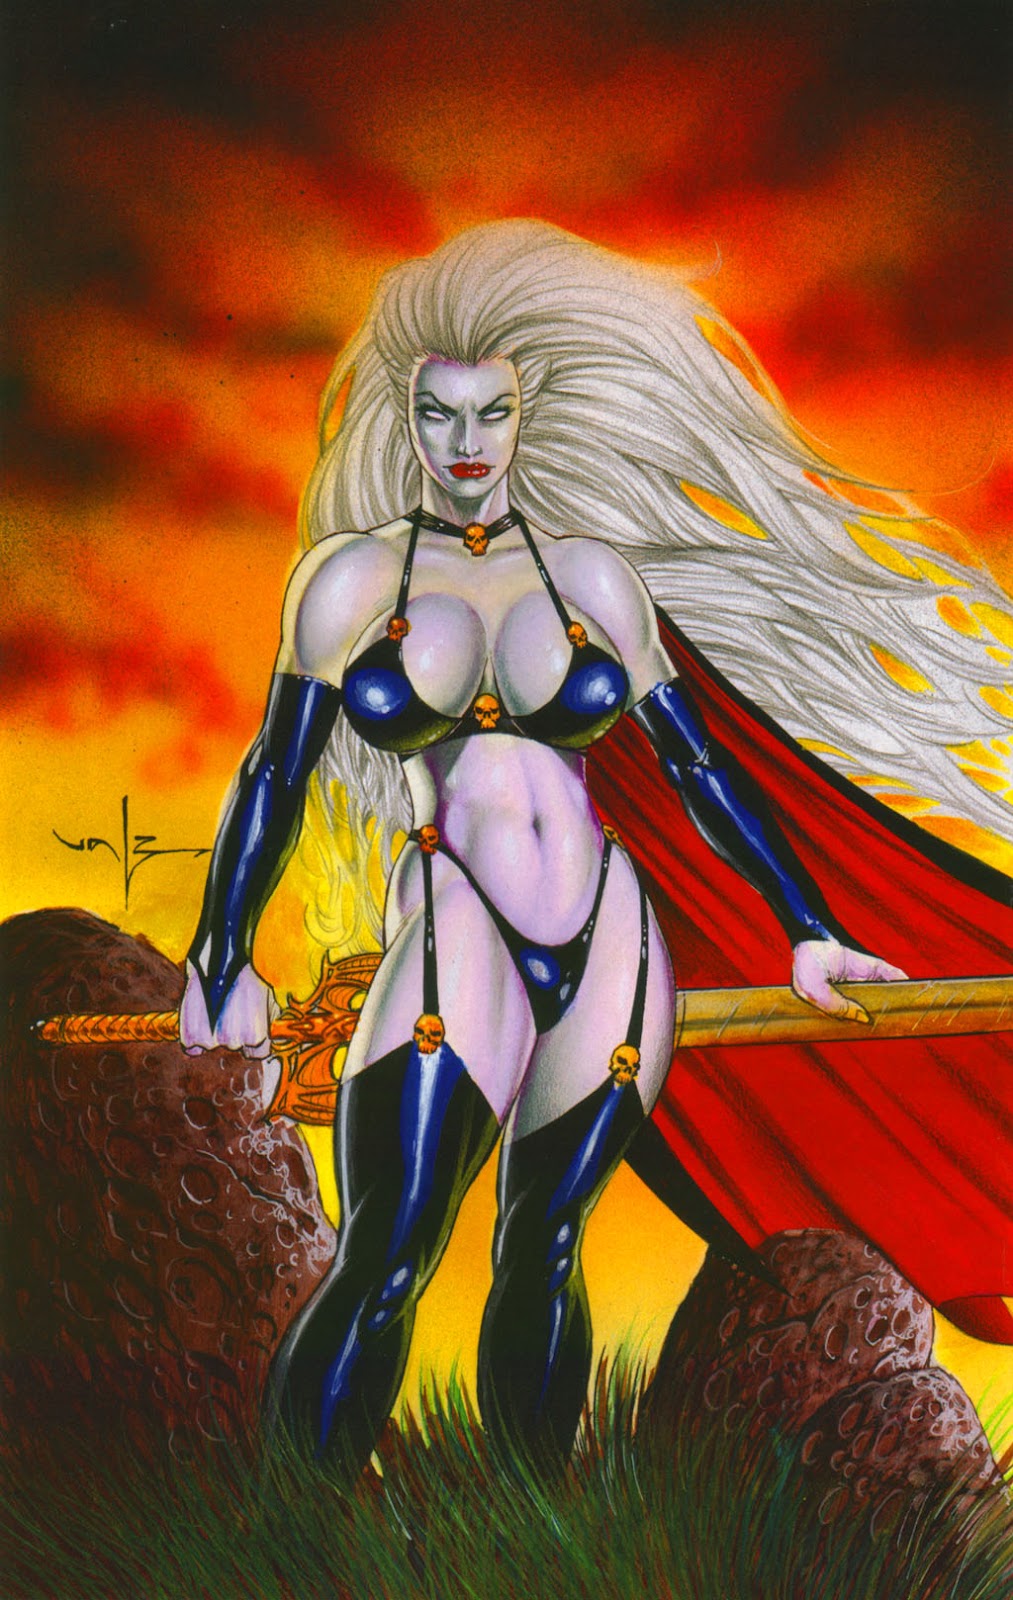 Brian Pulido’s Lady Death: 2006 Fetishes Special Full Reading. 